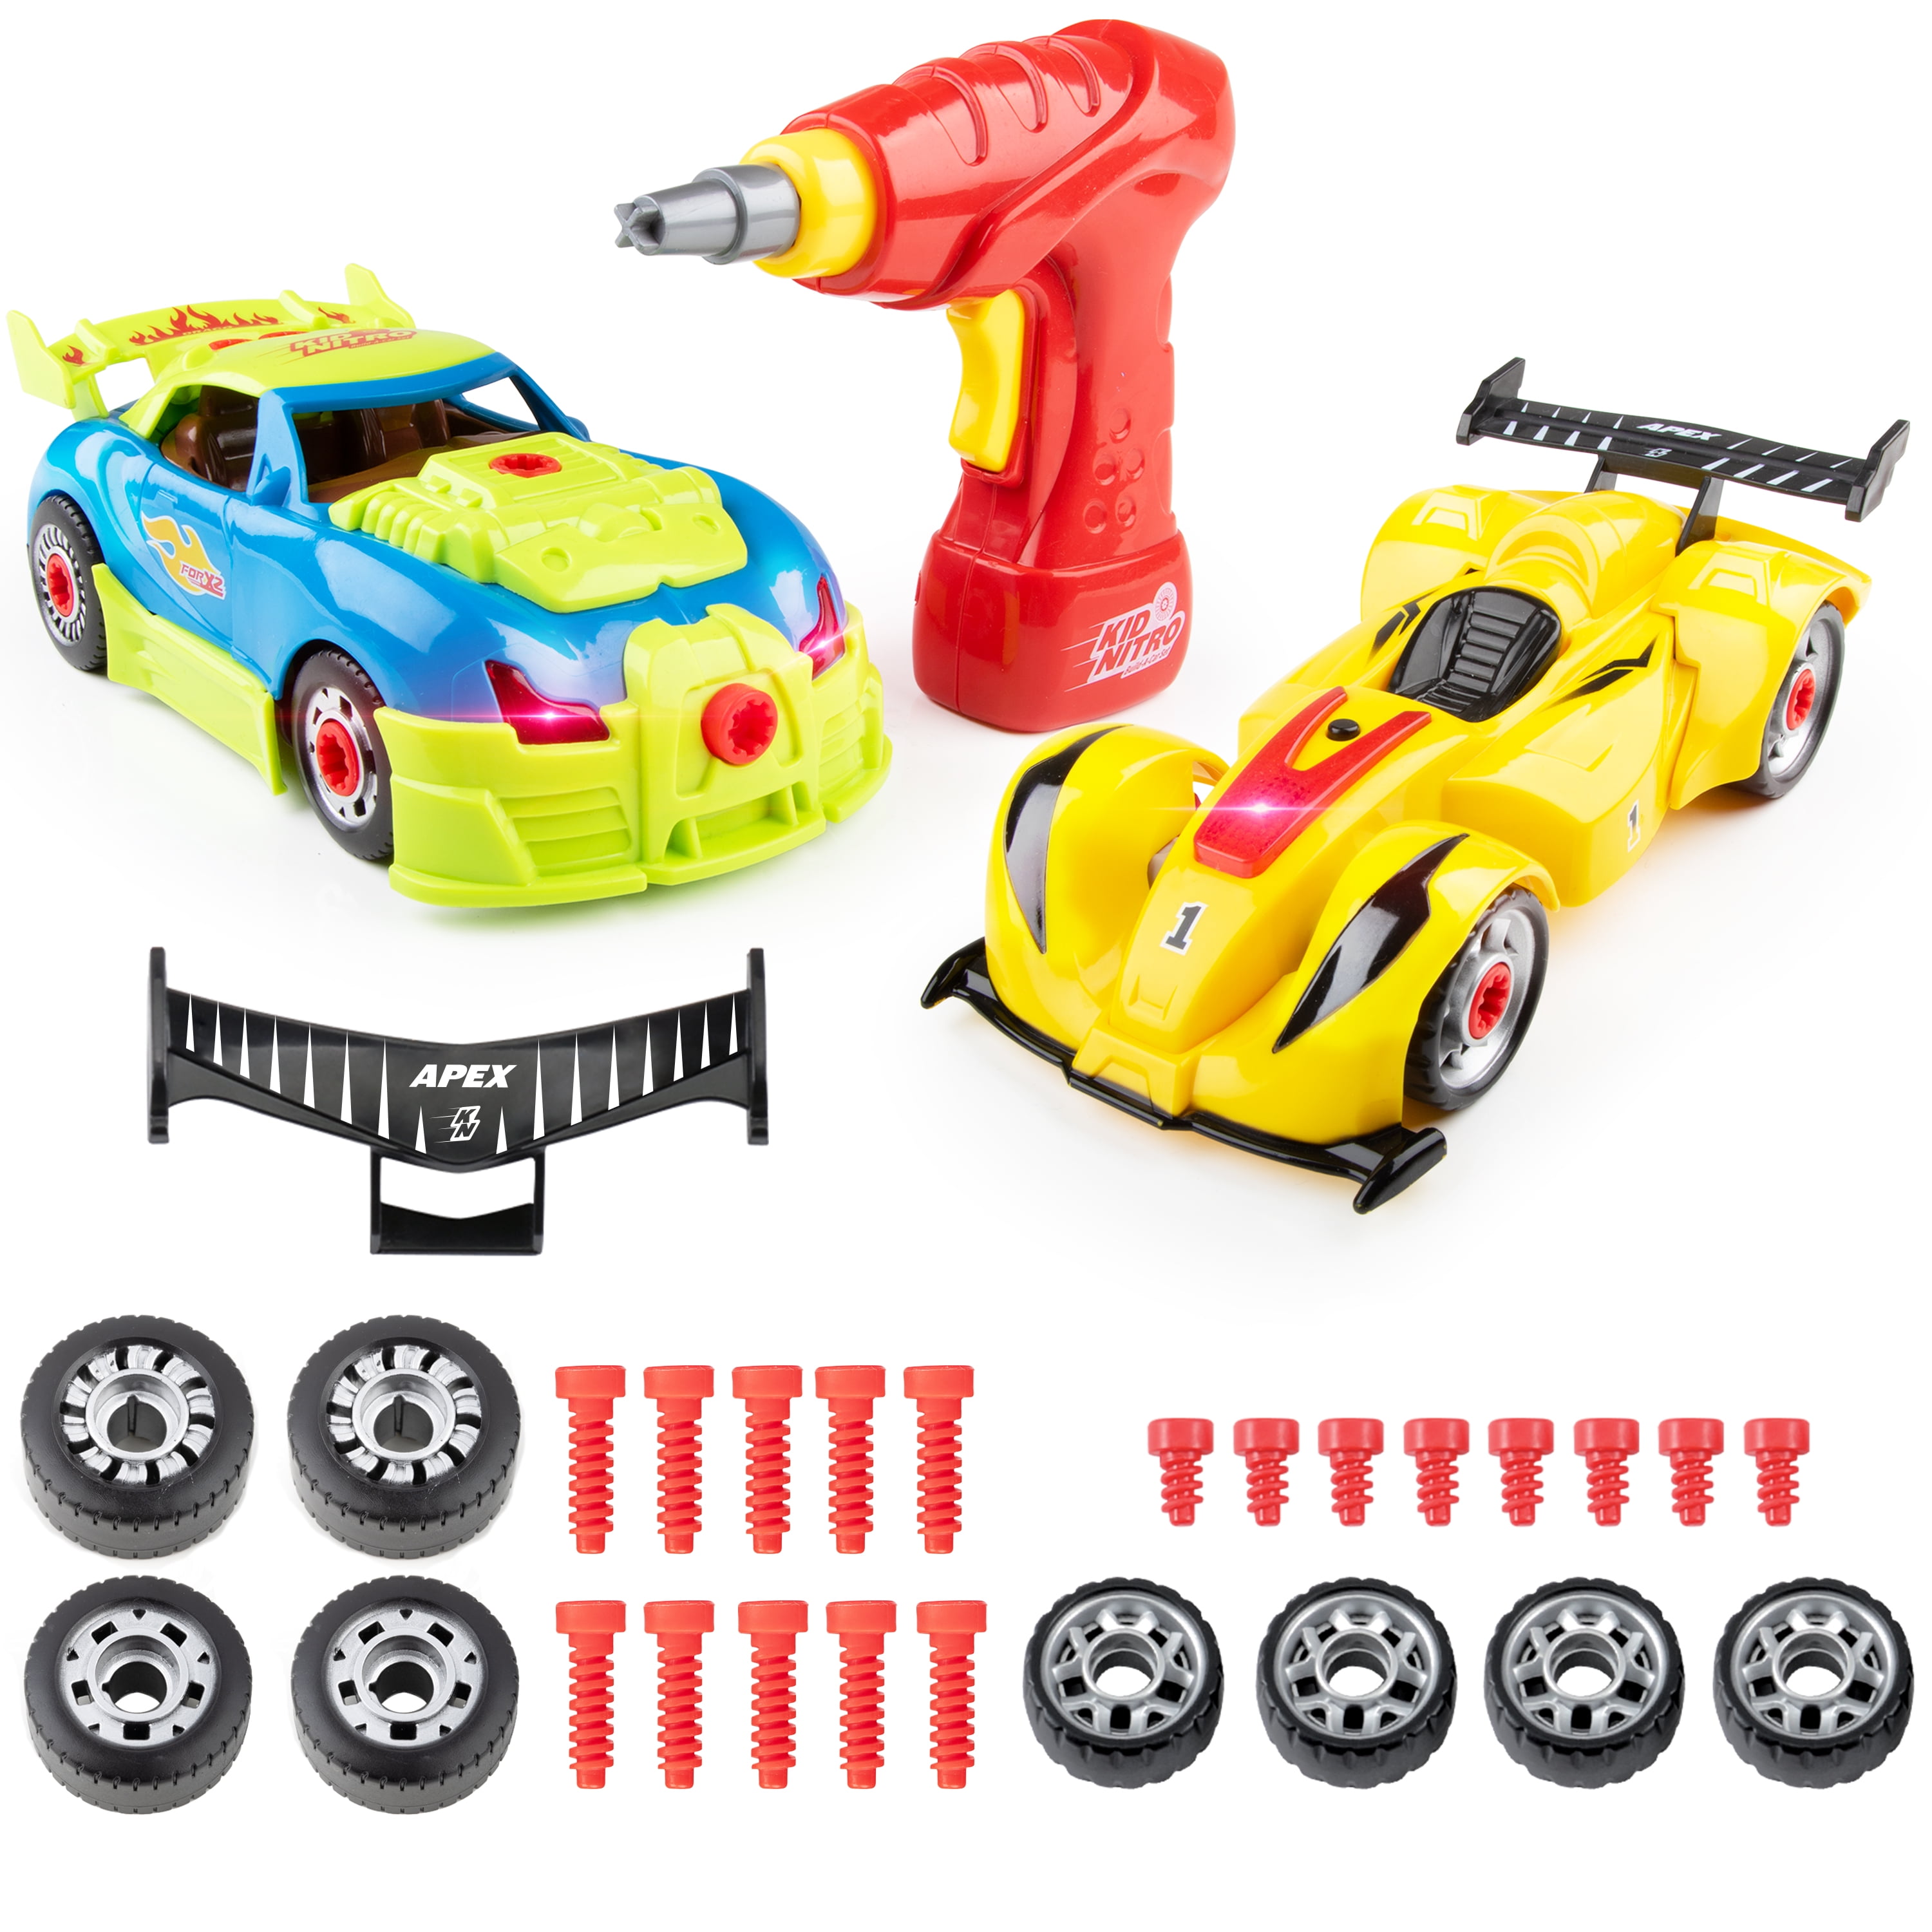 Kids Model Building Kits Toys Racing Cars For Children Educational 1 Set  gifts 